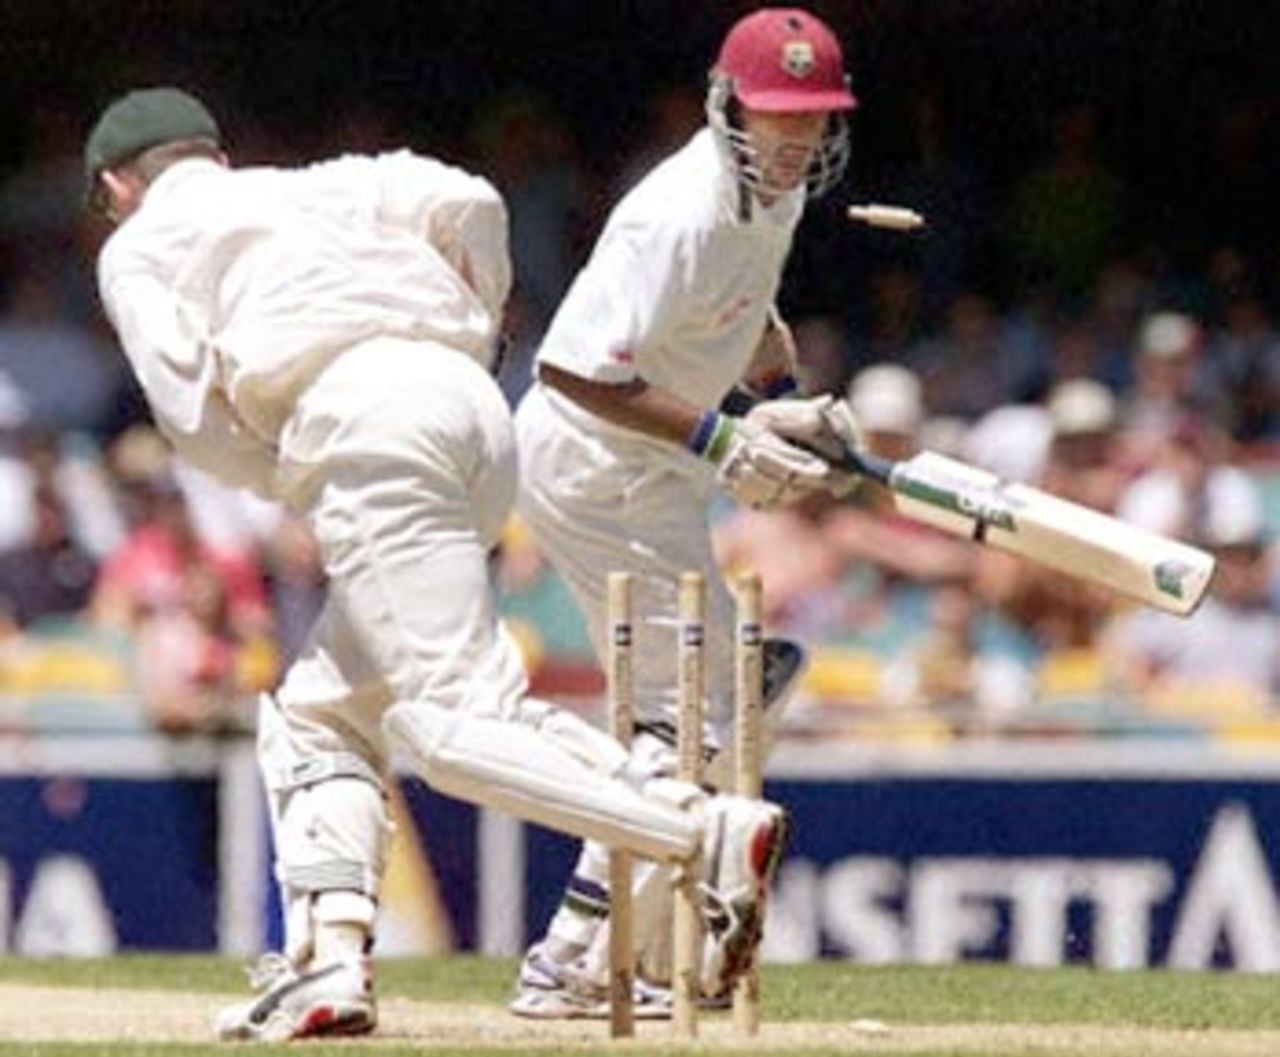 West Indian batsman Darren Ganga (R) turn to see Australian wicketkeeper Adam Gilchrist (L)  stumping him on the third day of the first Test match at the Gabba in Brisbane, 25 November  2000. At lunch the West Indies were struggling in their second innings at 81-6, still trailing  Australia by 169 runs.